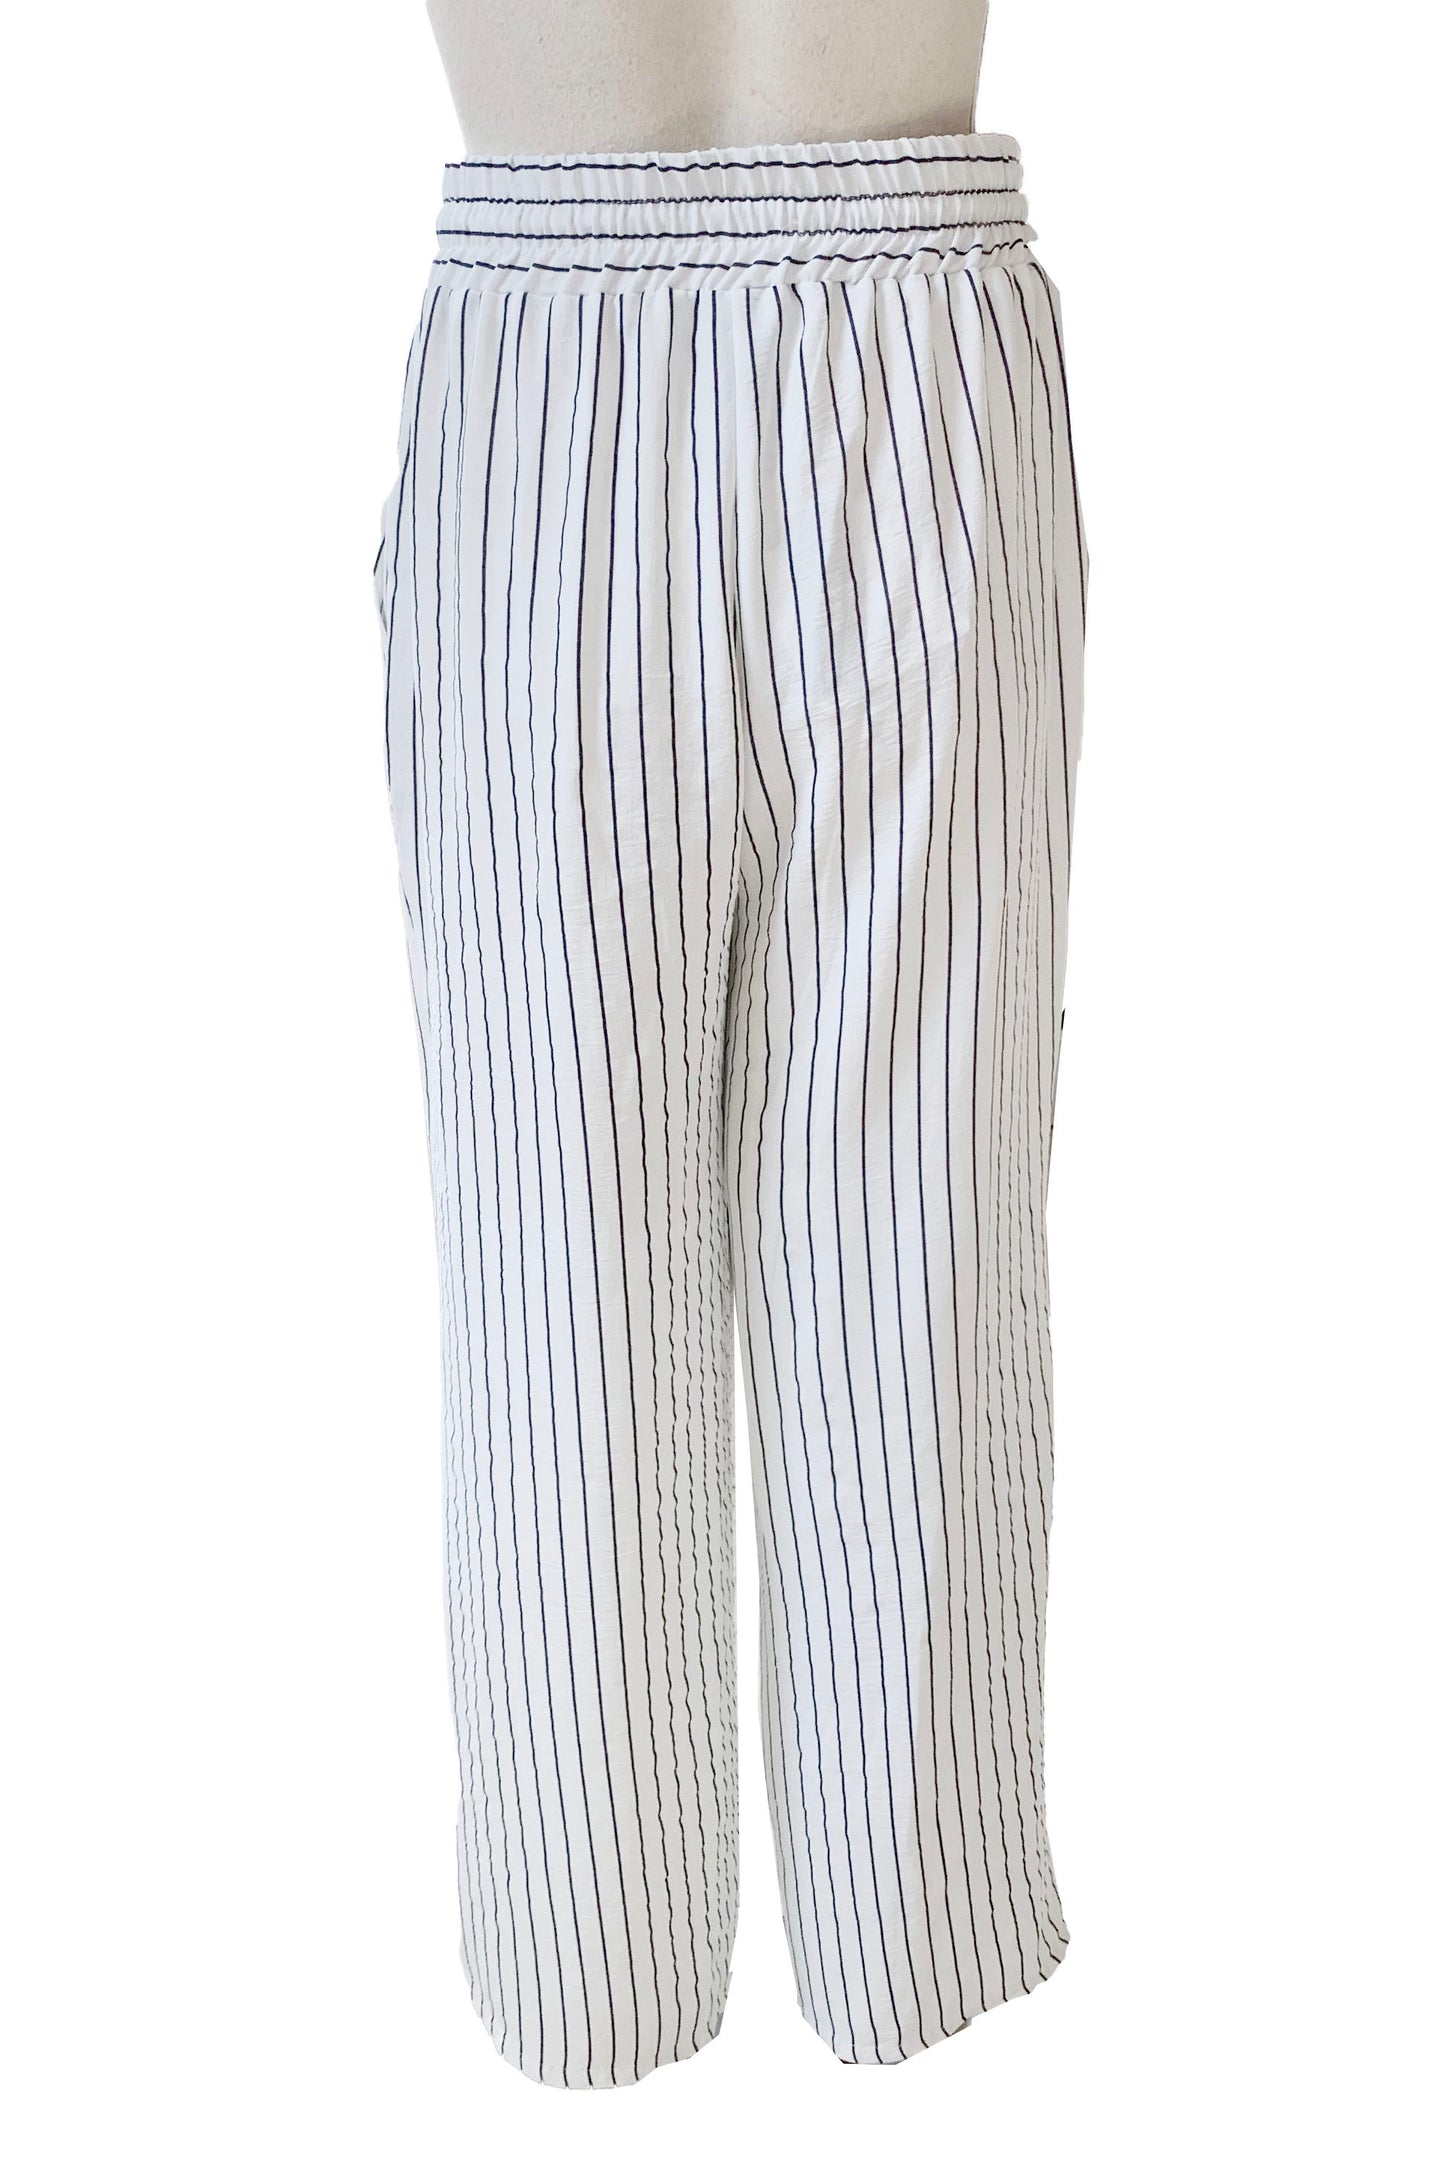 A back view of The Concordia Pant by Pure Essence in Ivory Pinstripe is shown on a mannequin in front of a white background